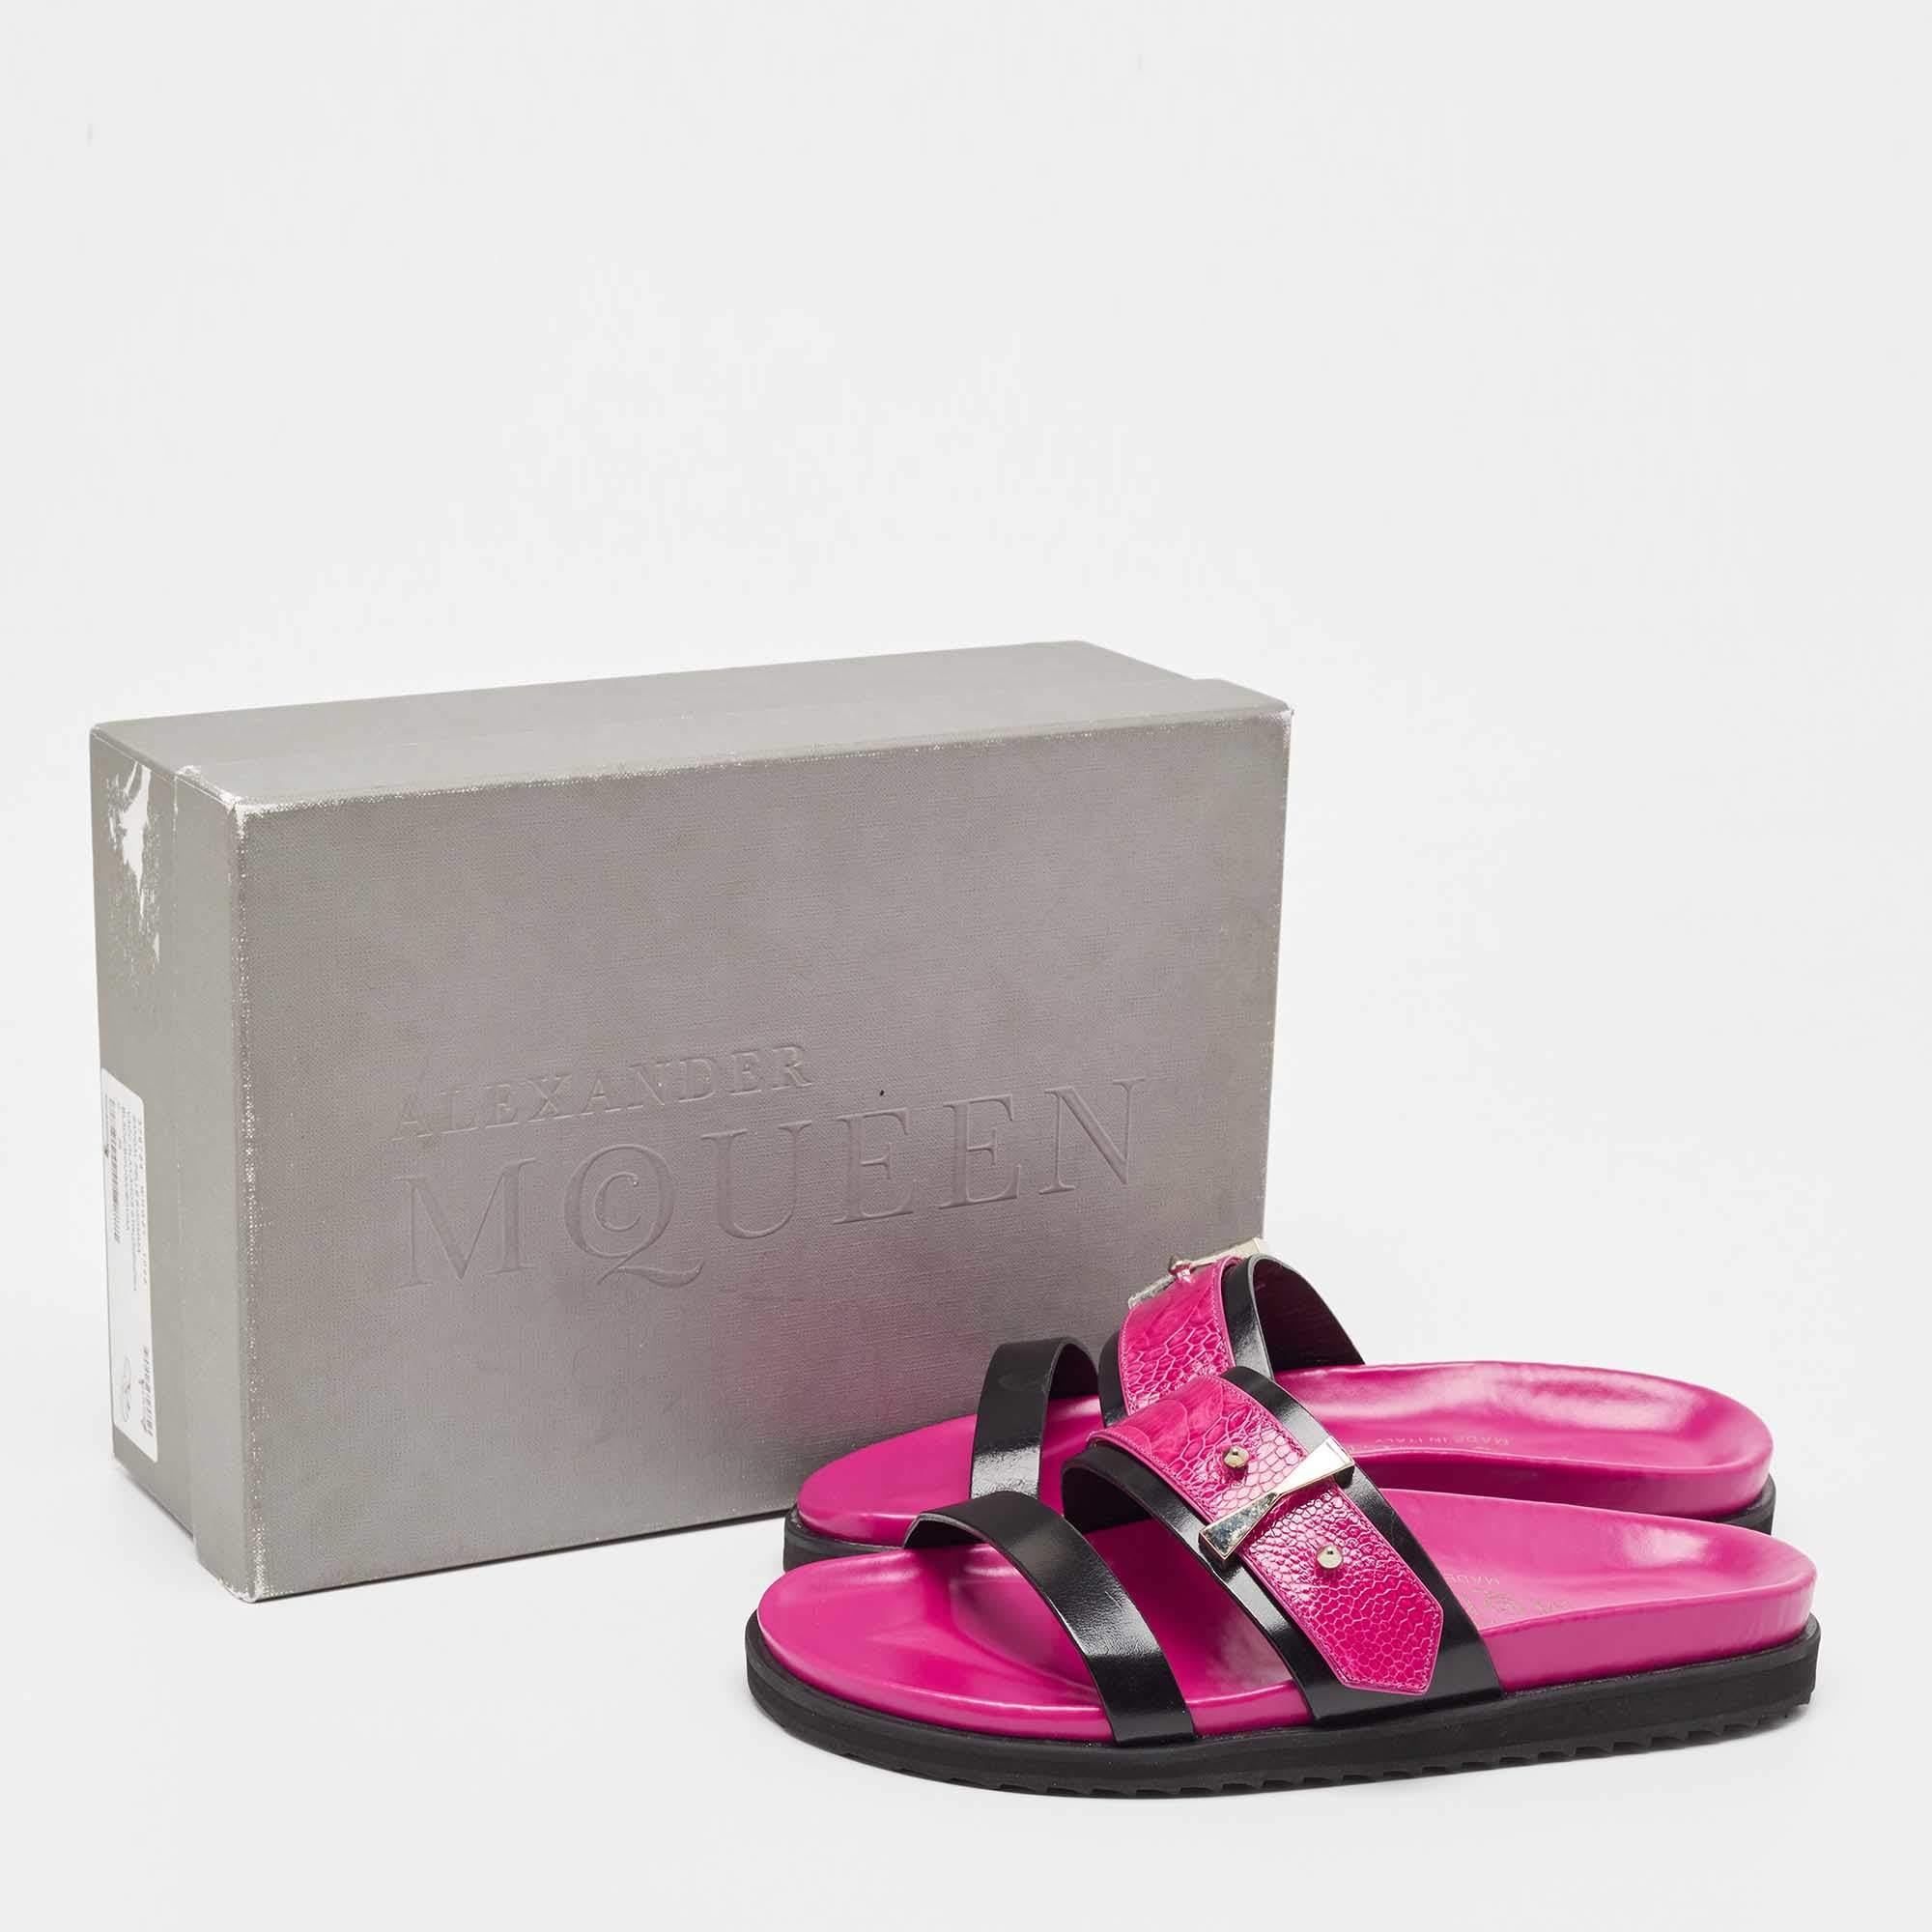 Alexander McQueen Pink/Black Ostrich Embossed and Leather Flat Sandals Size 38 4